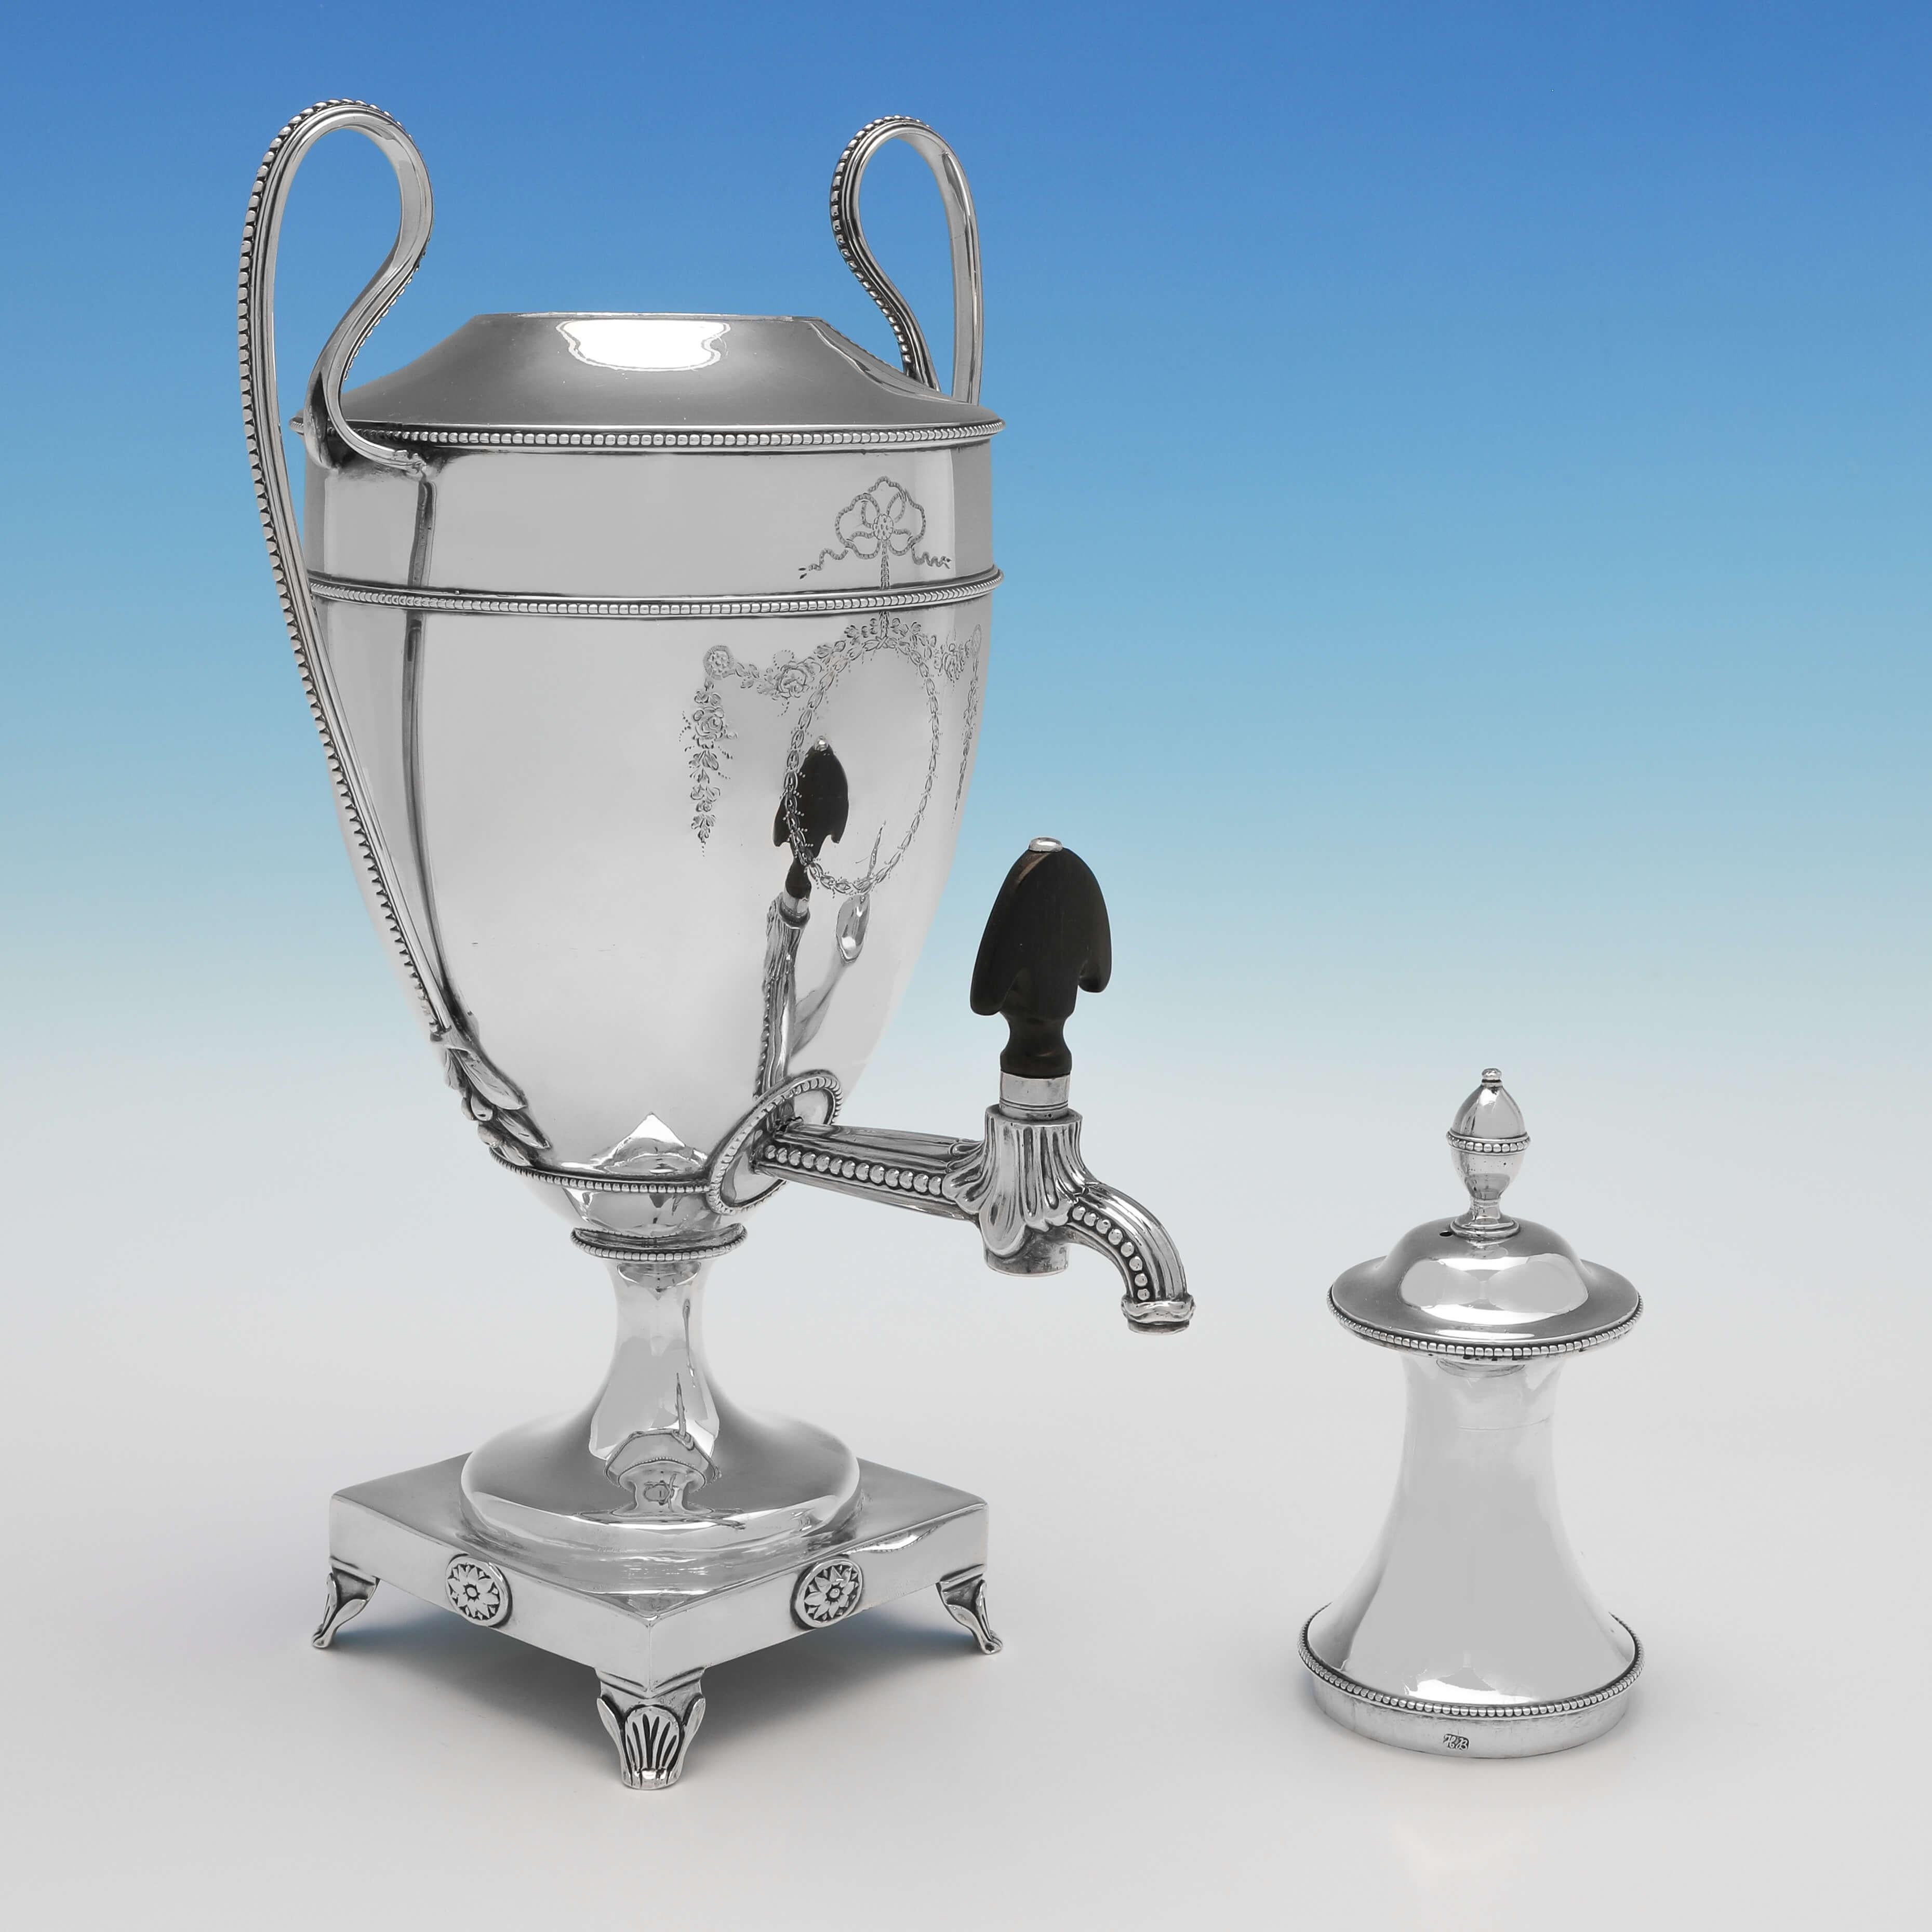 Hallmarked in London in 1780 by Hester Bateman, this handsome George III, Antique Sterling Silver Tea Urn, is in the Neoclassical taste, with bright cut engraved decoration and bead borders. The tea urn measures 14.25